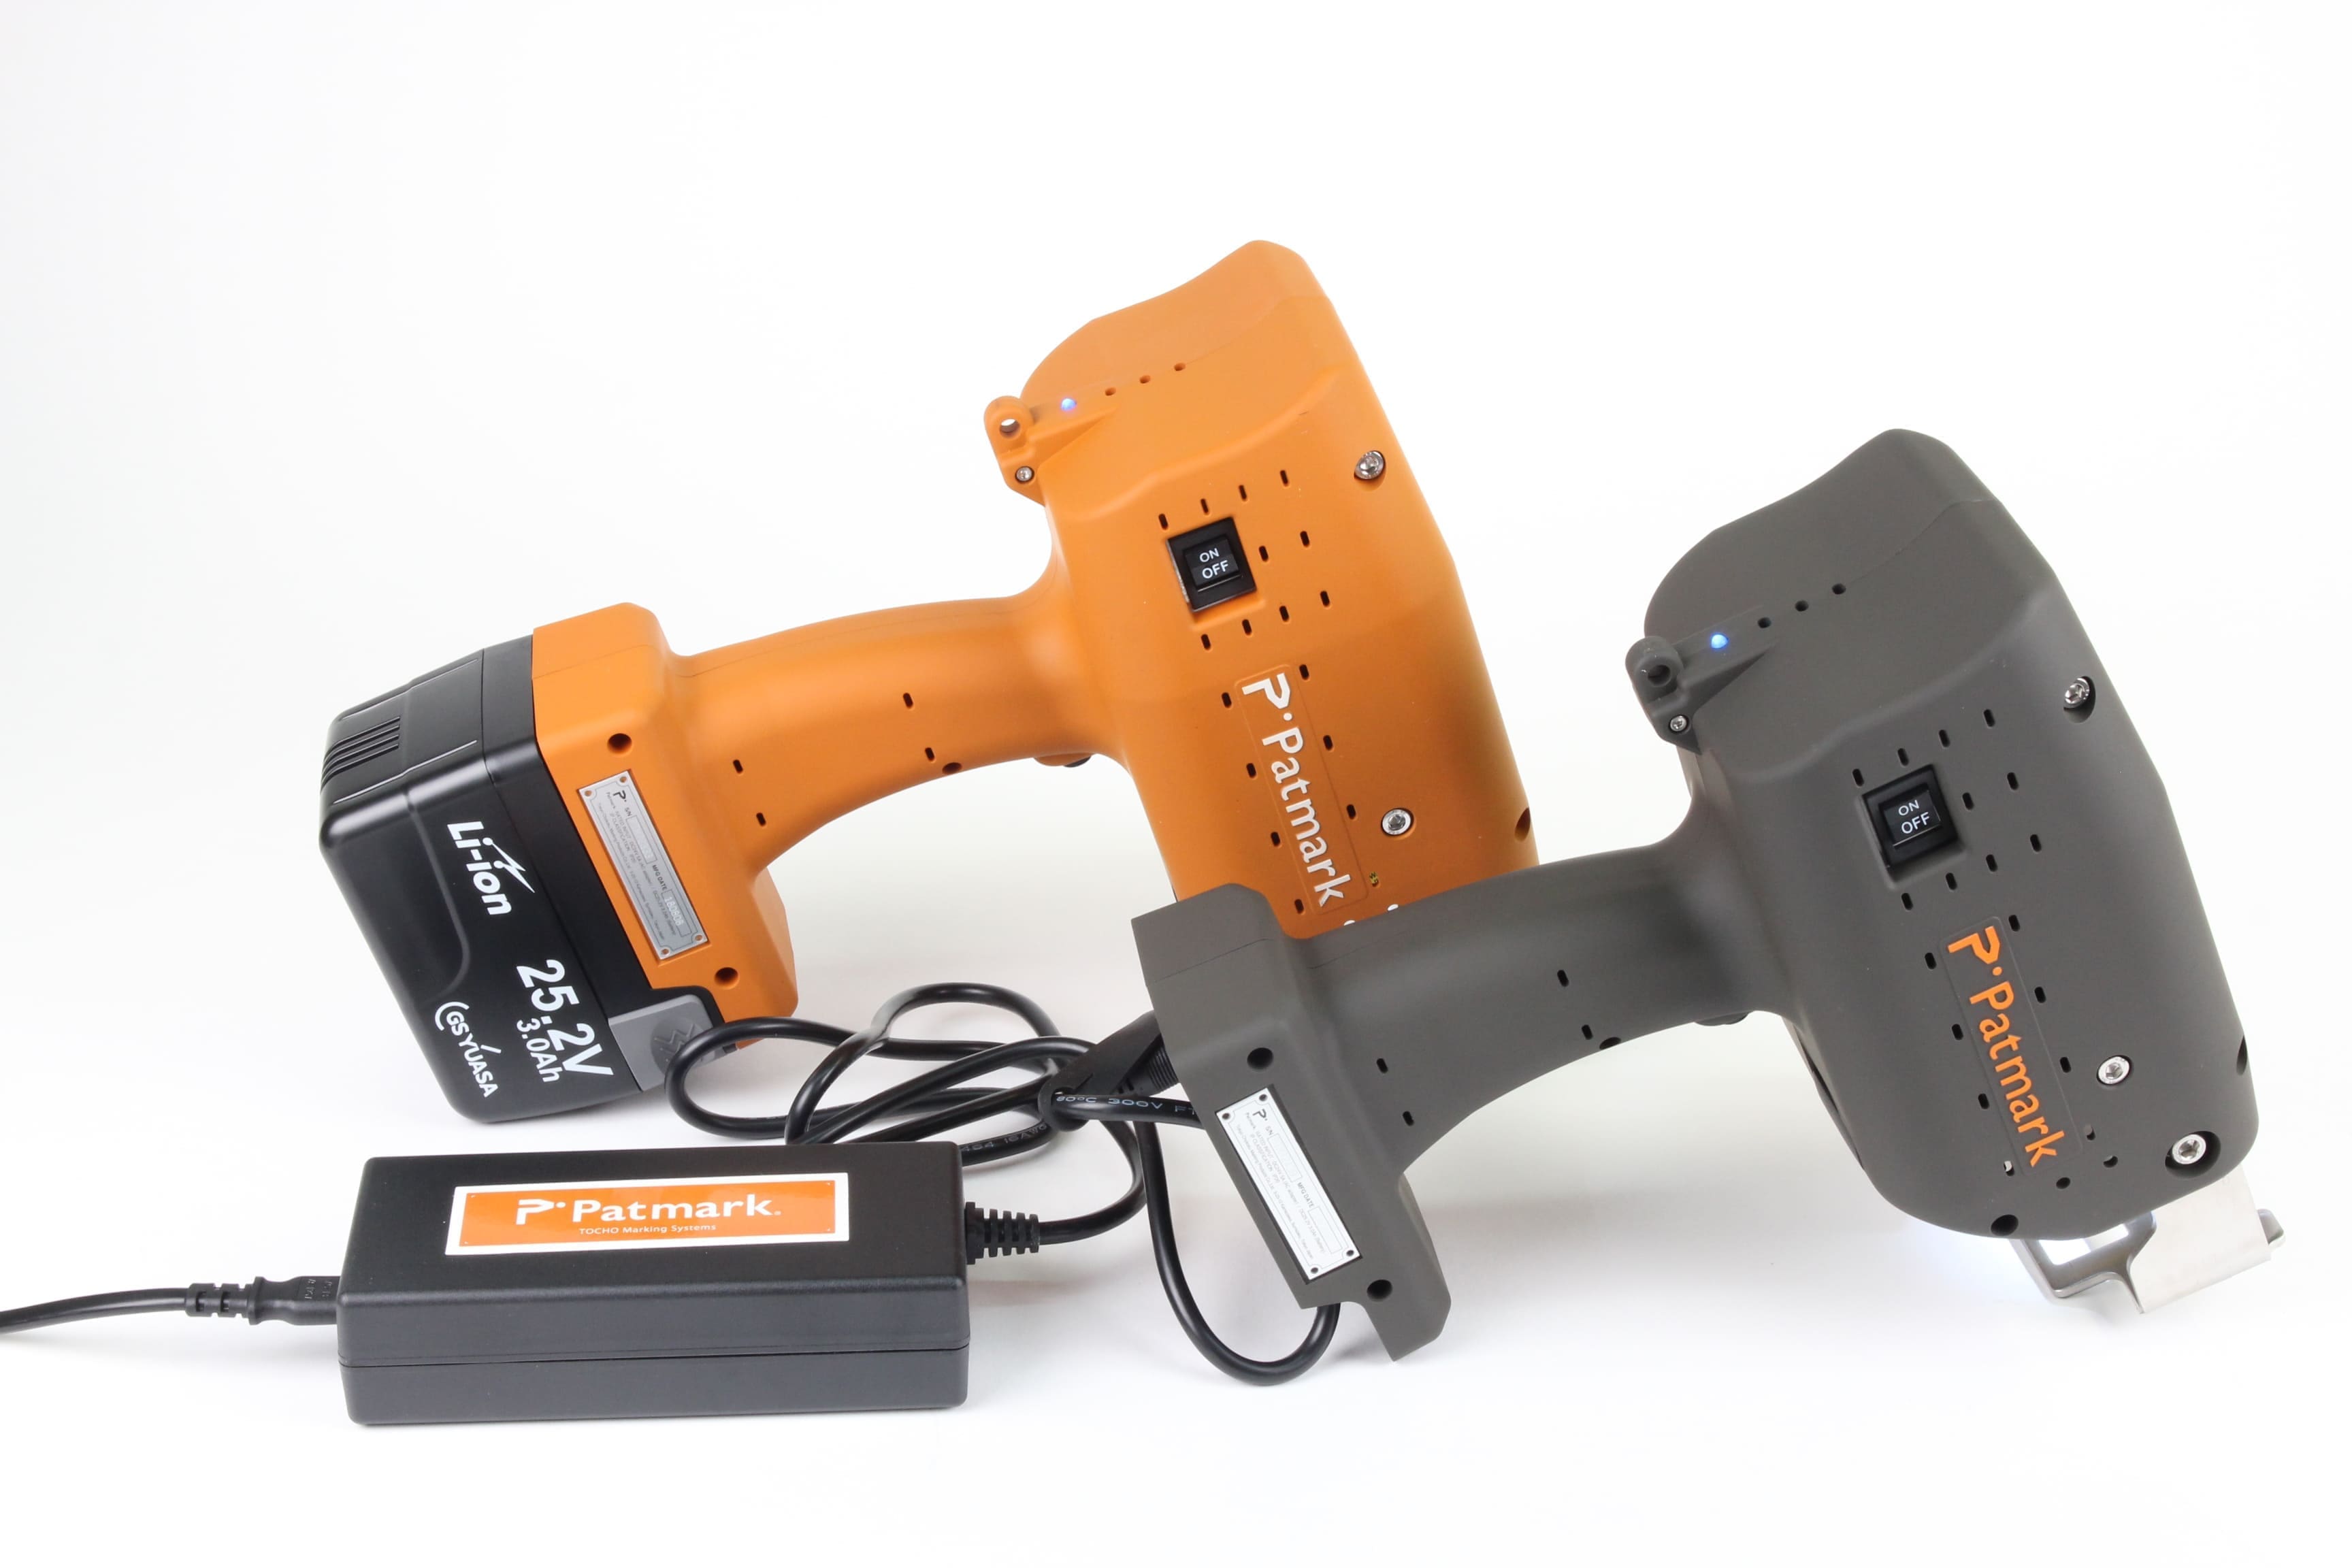 Image of two Patmark Series units, one in orange and one in black, placed side by side. The black one is equipped with an adapter.